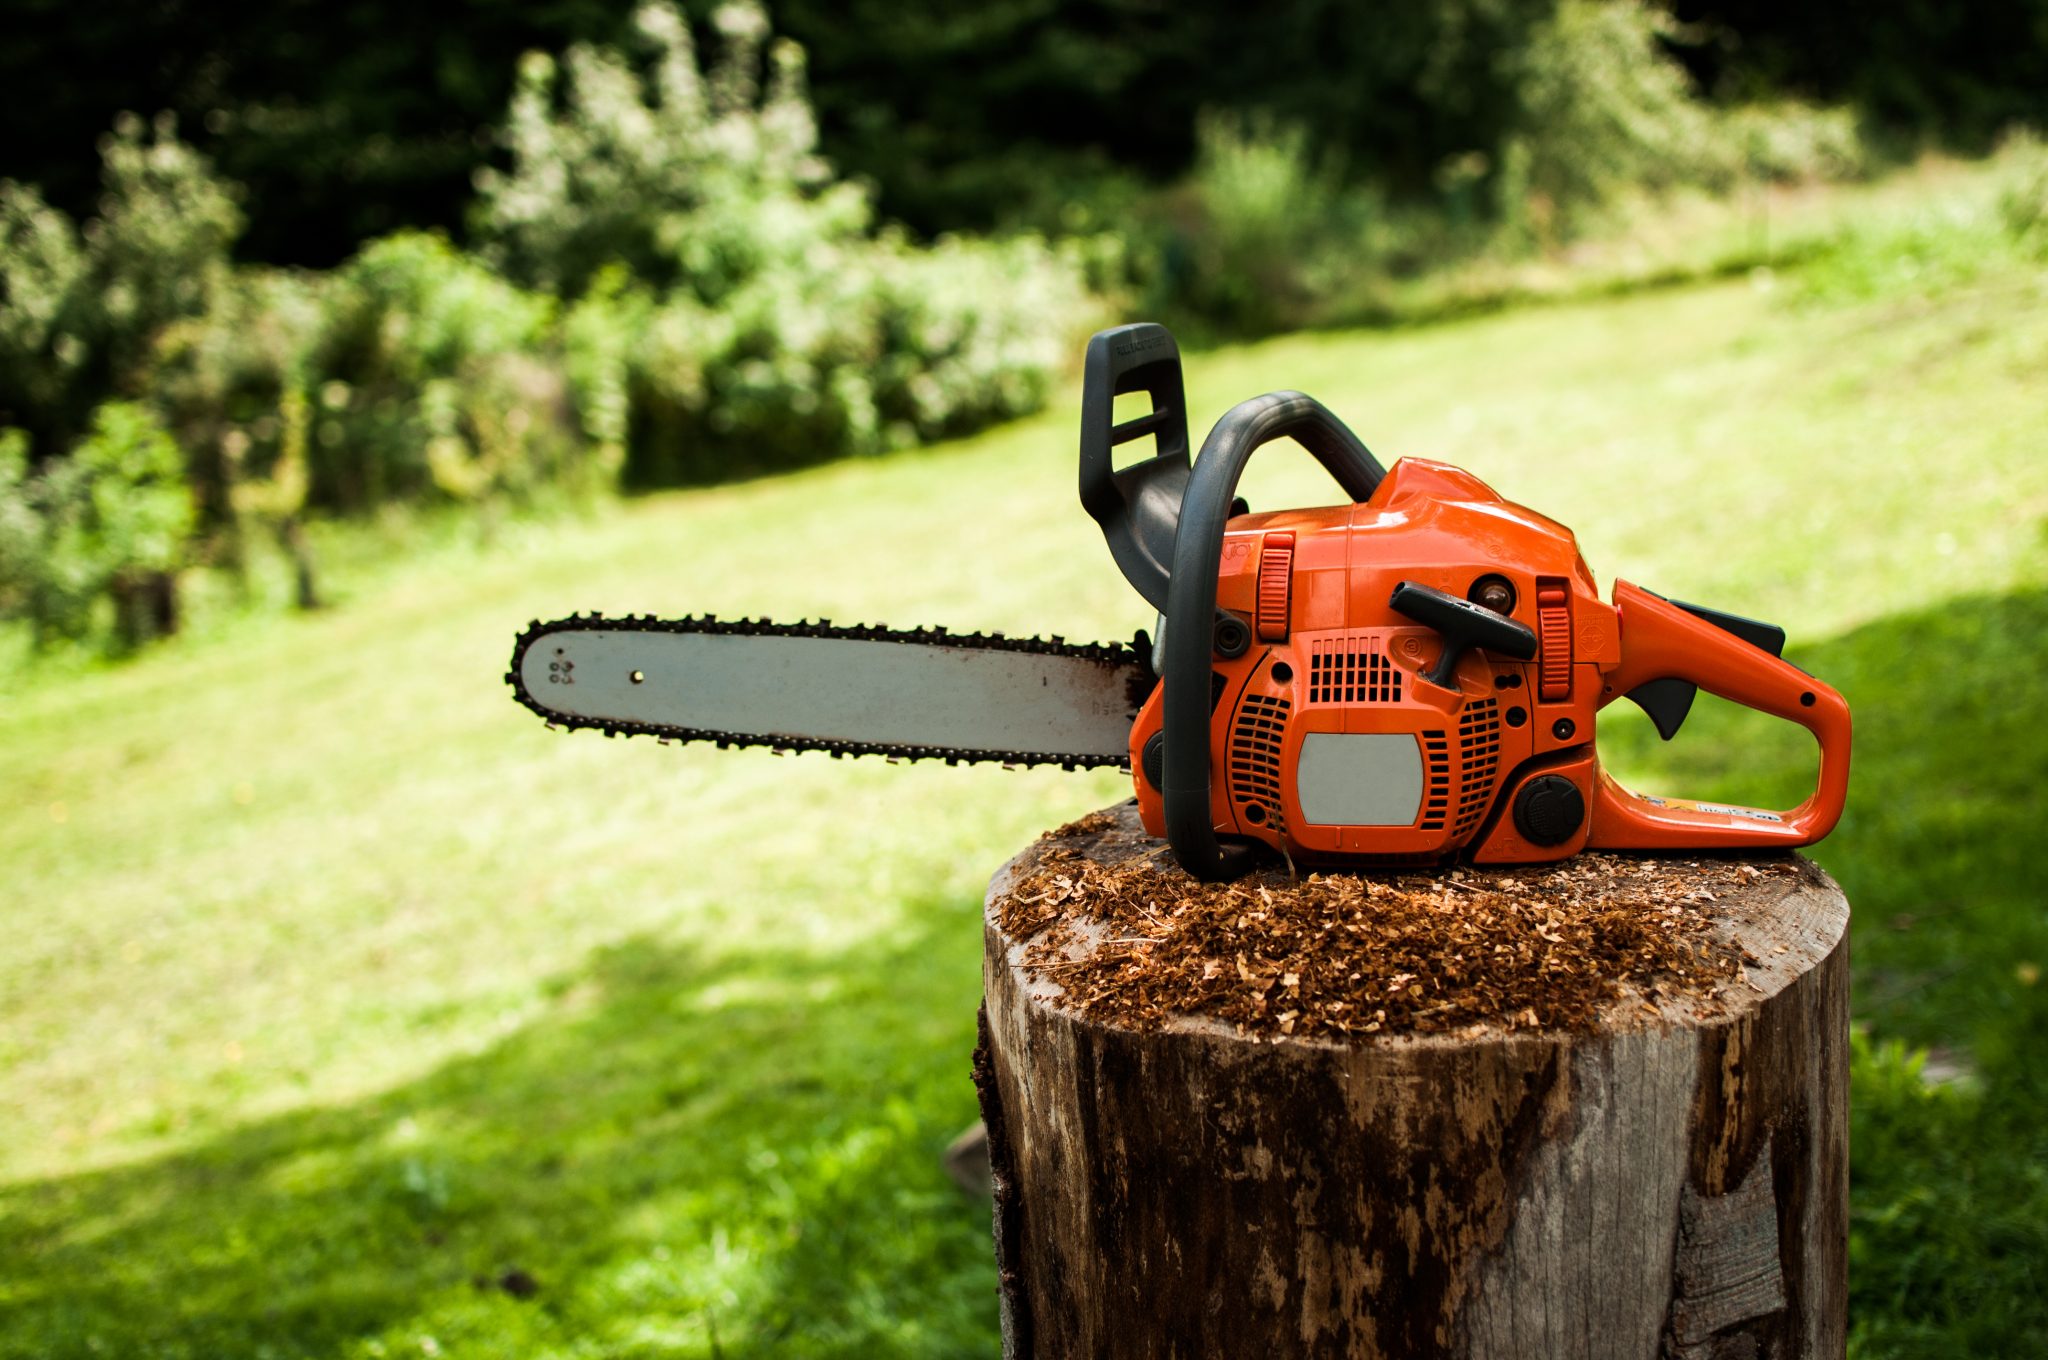 A chainsaw on a wooden stump.